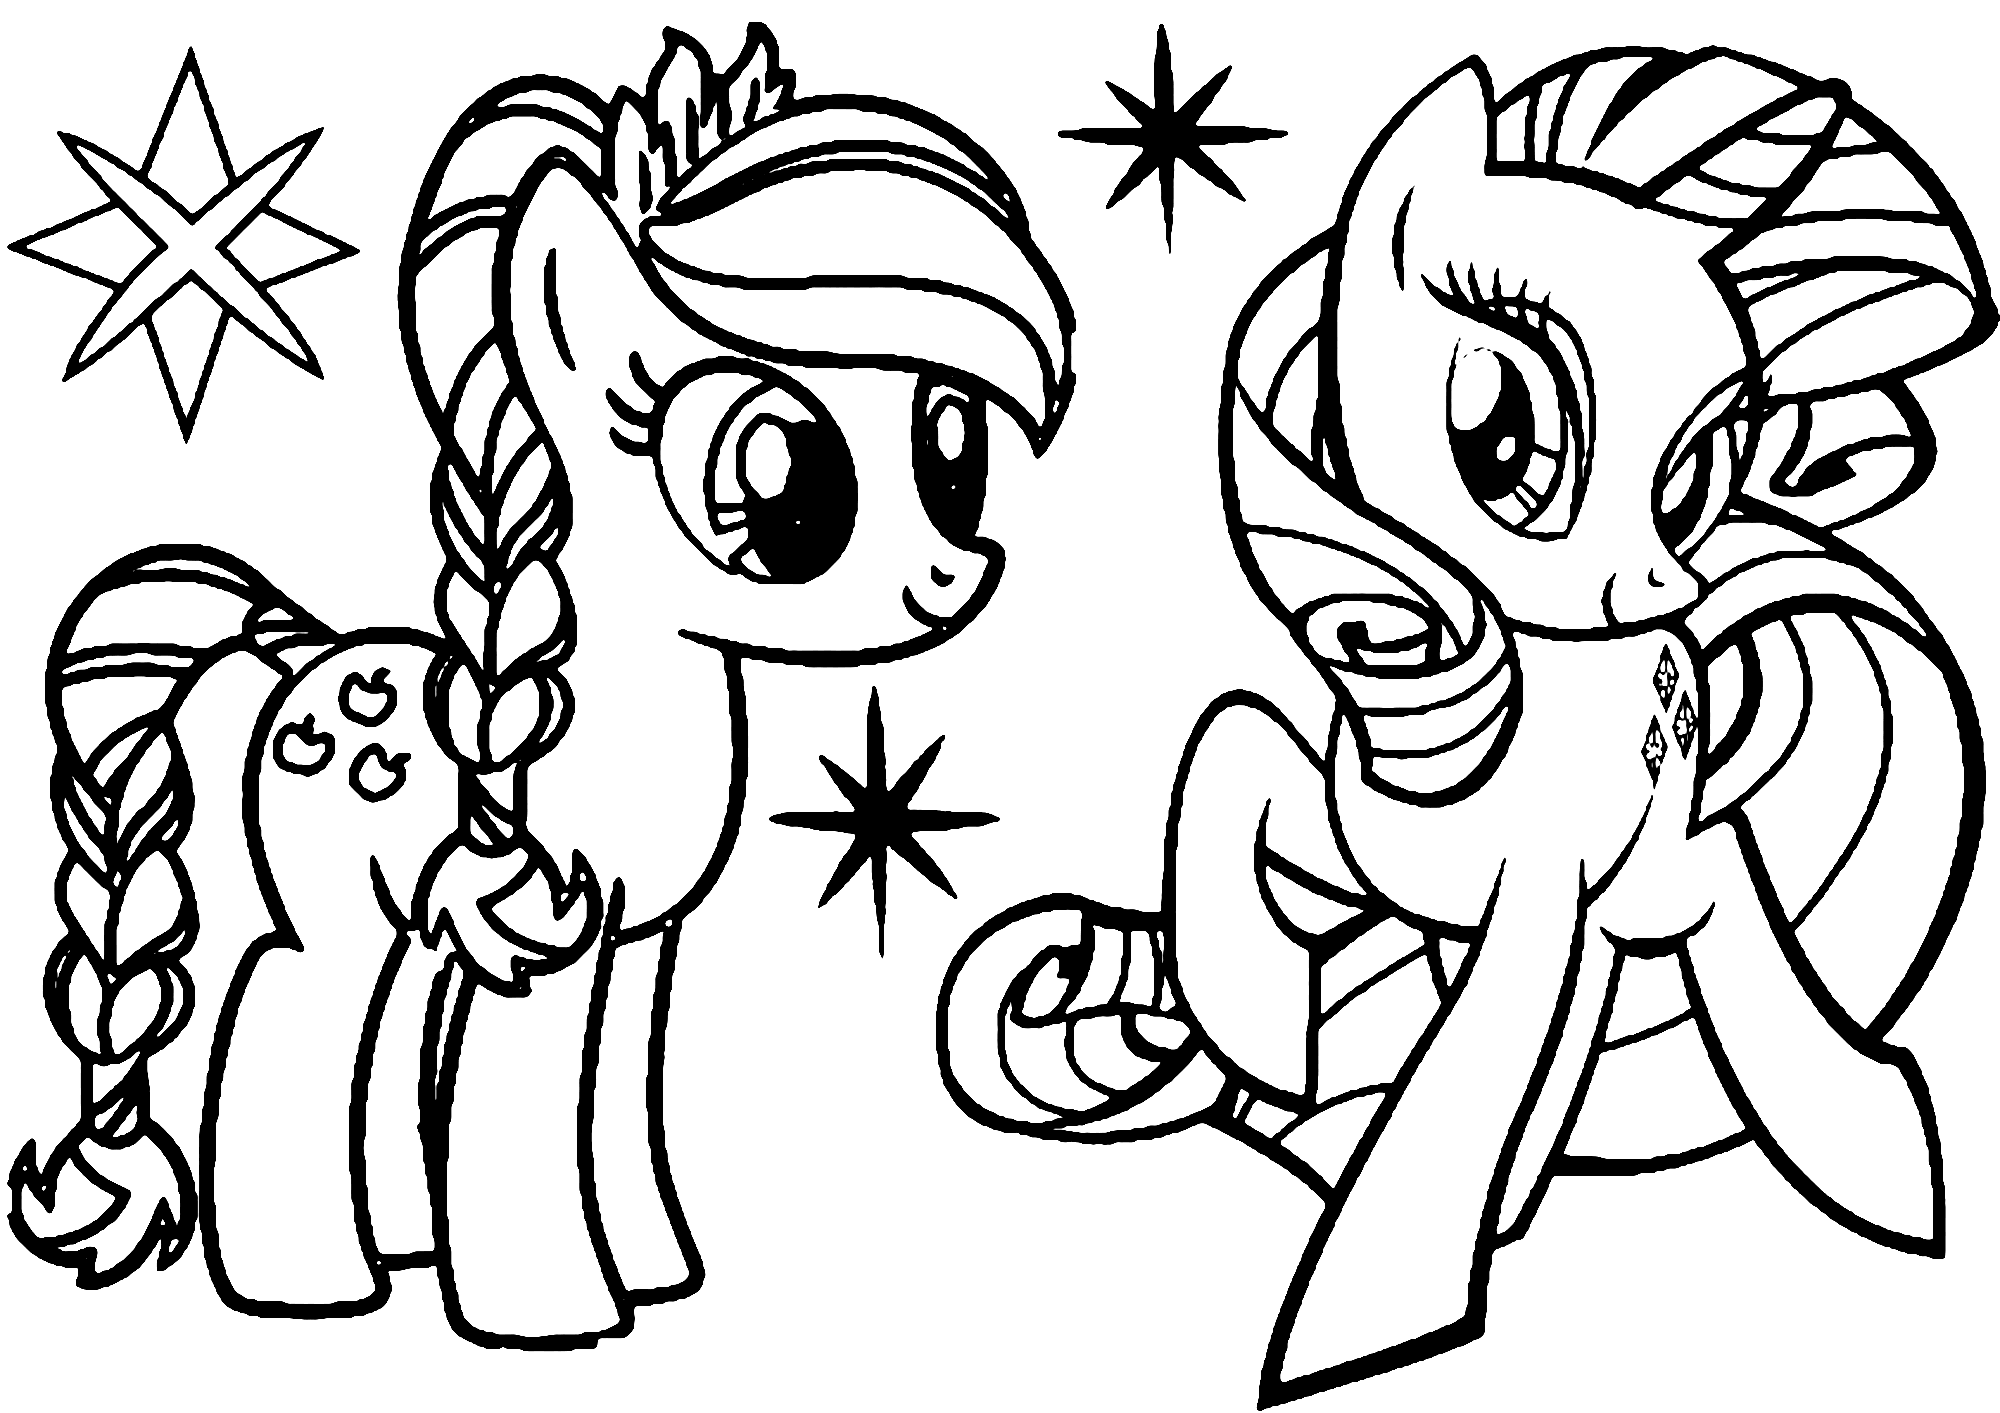 My Little Pony Applejack and Rarity Coloring Page,My Little Pony